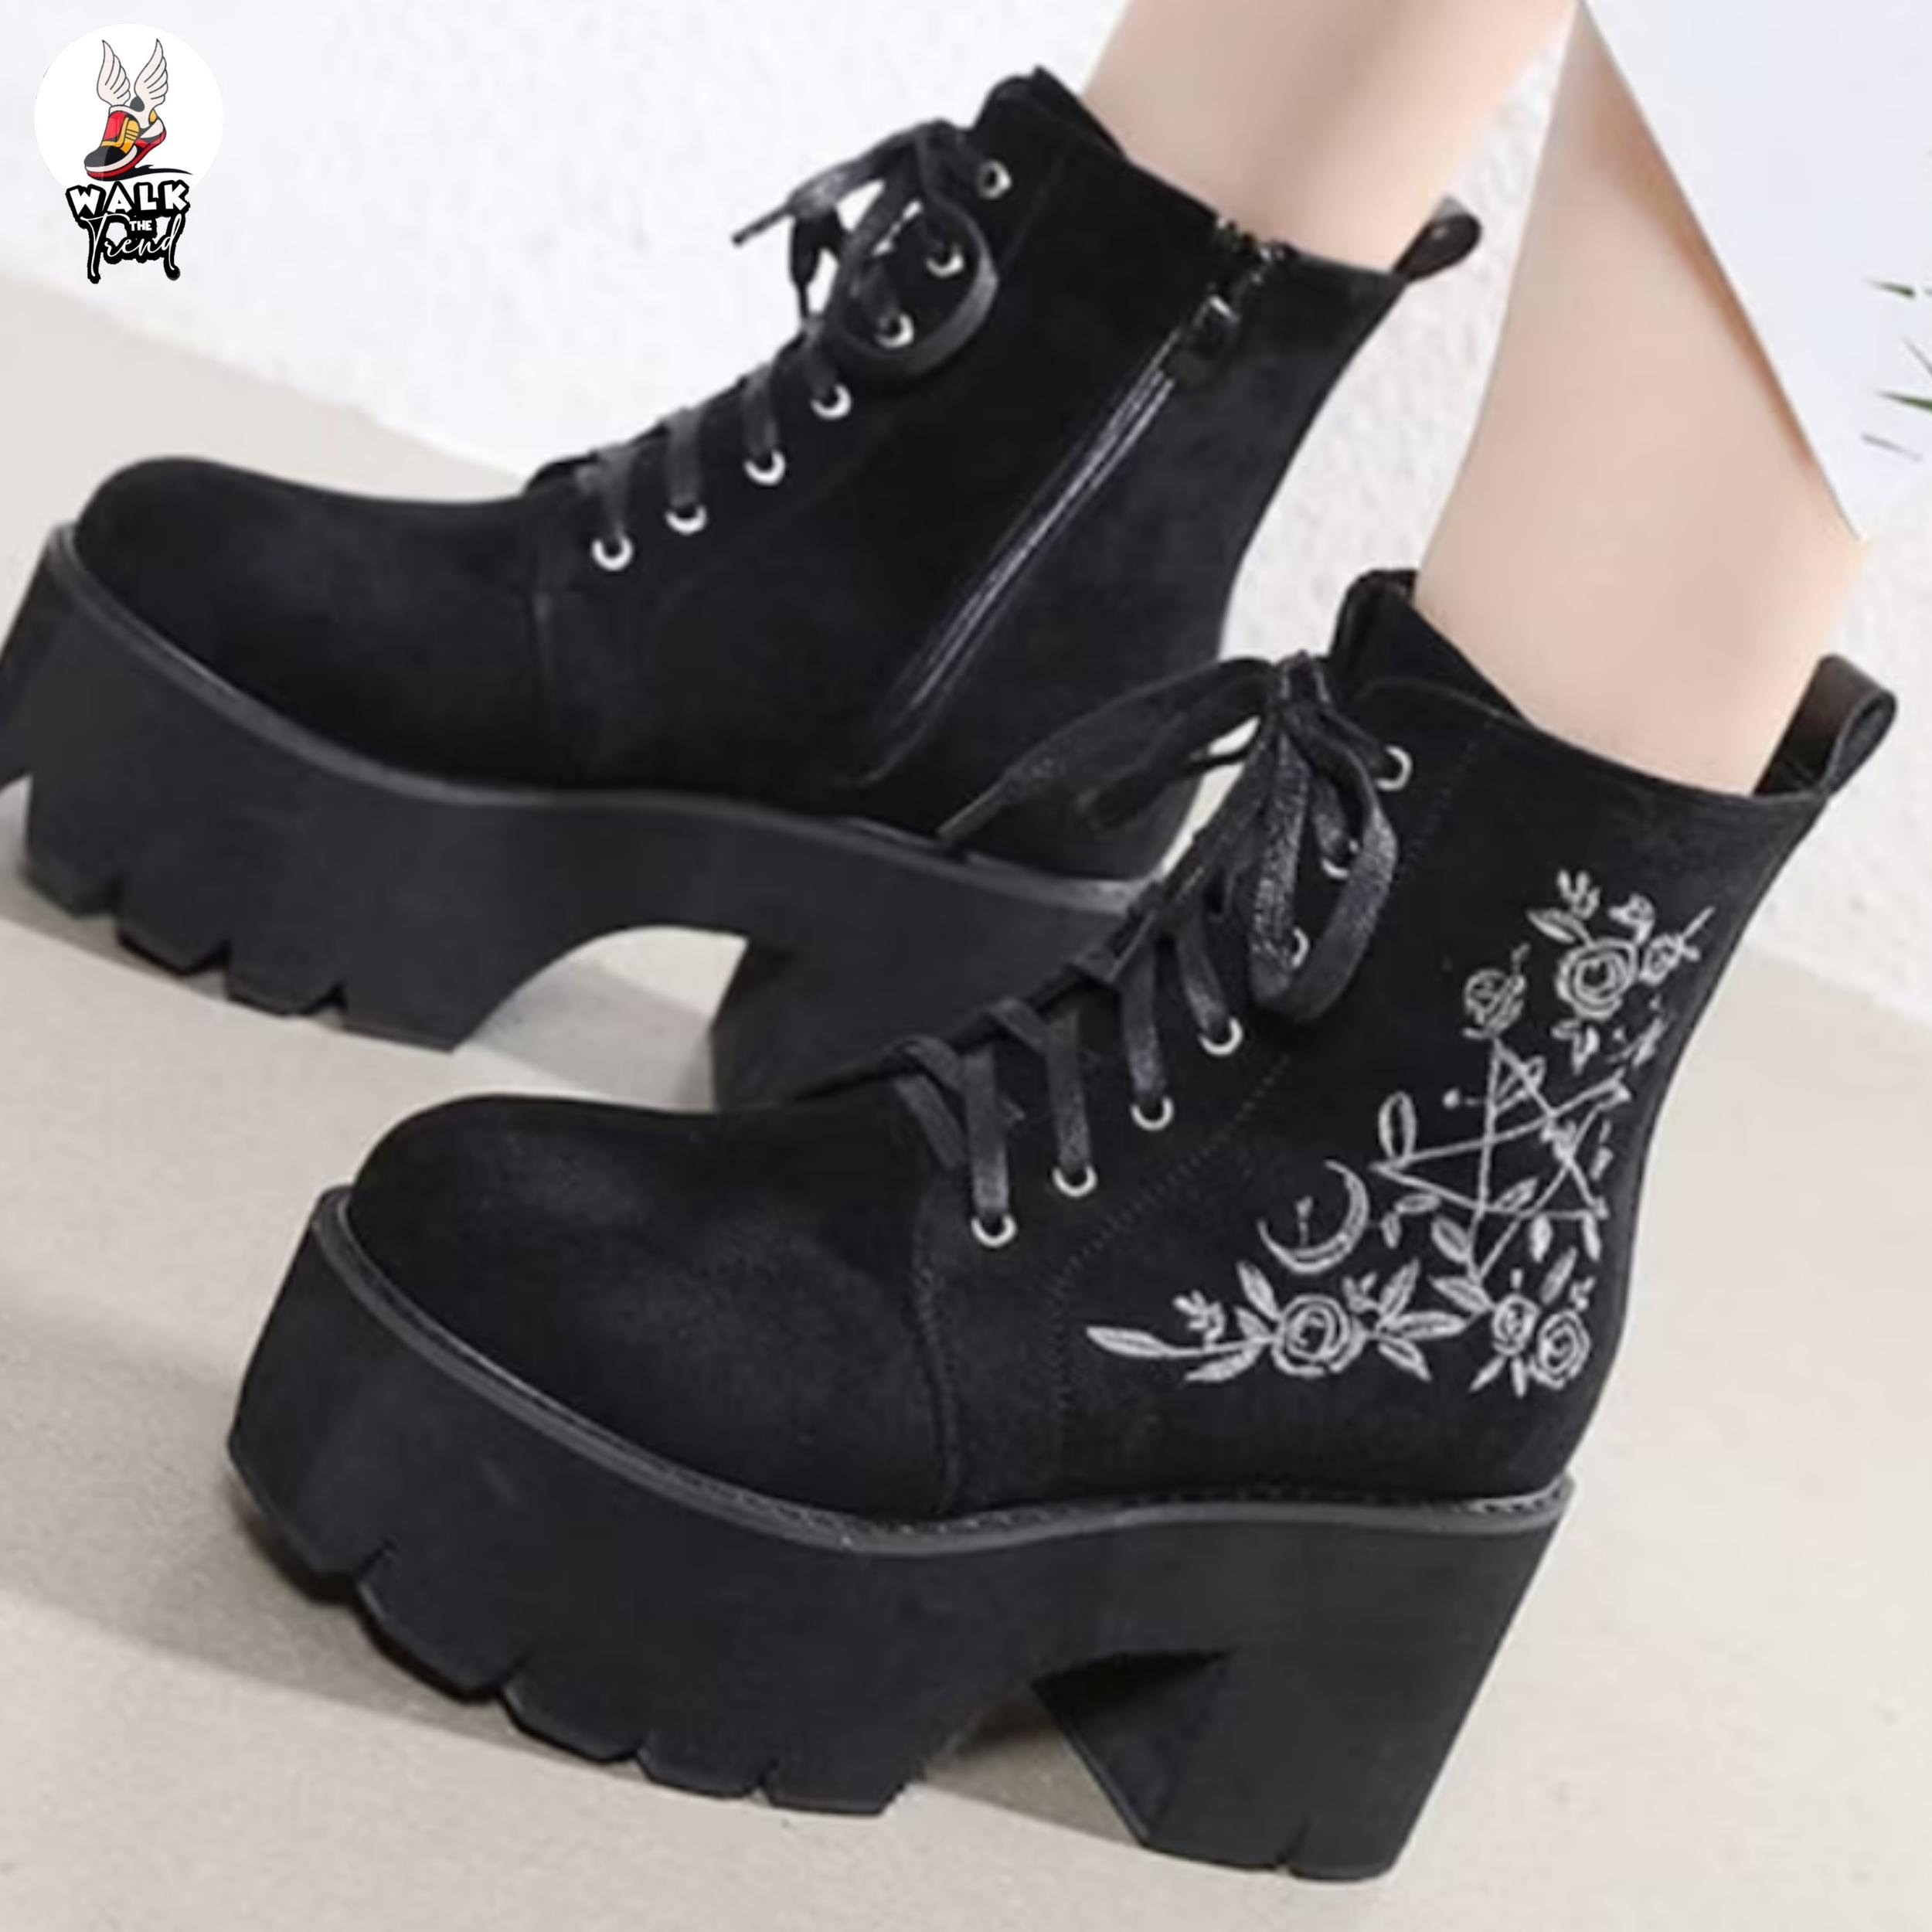 Gothic Punk Platform Lace Up Boots with Witch Pentagram Moon Embroidery